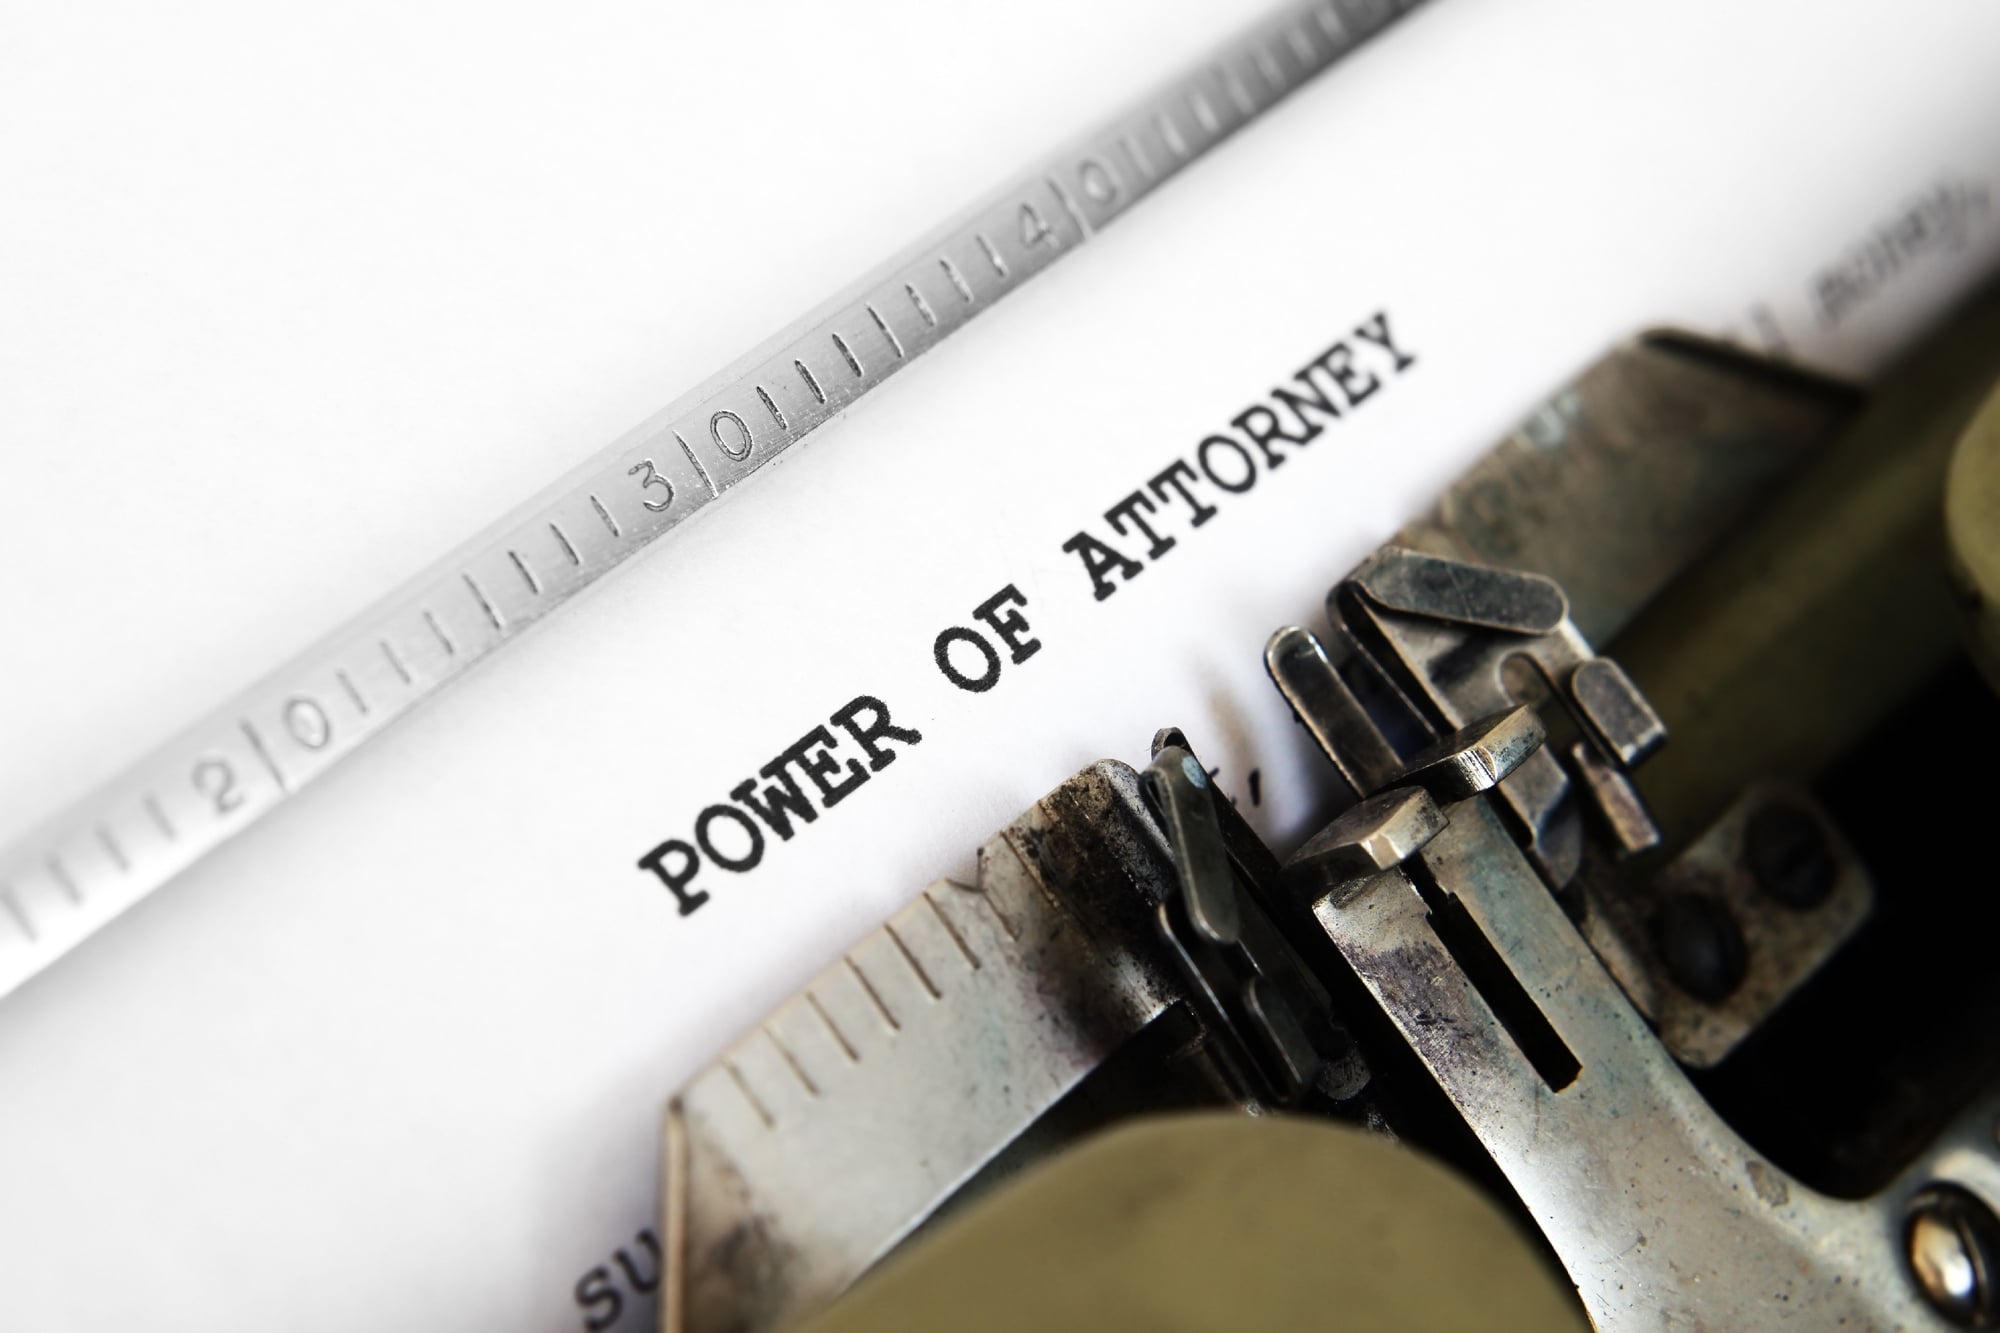 What is Power of Attorney?